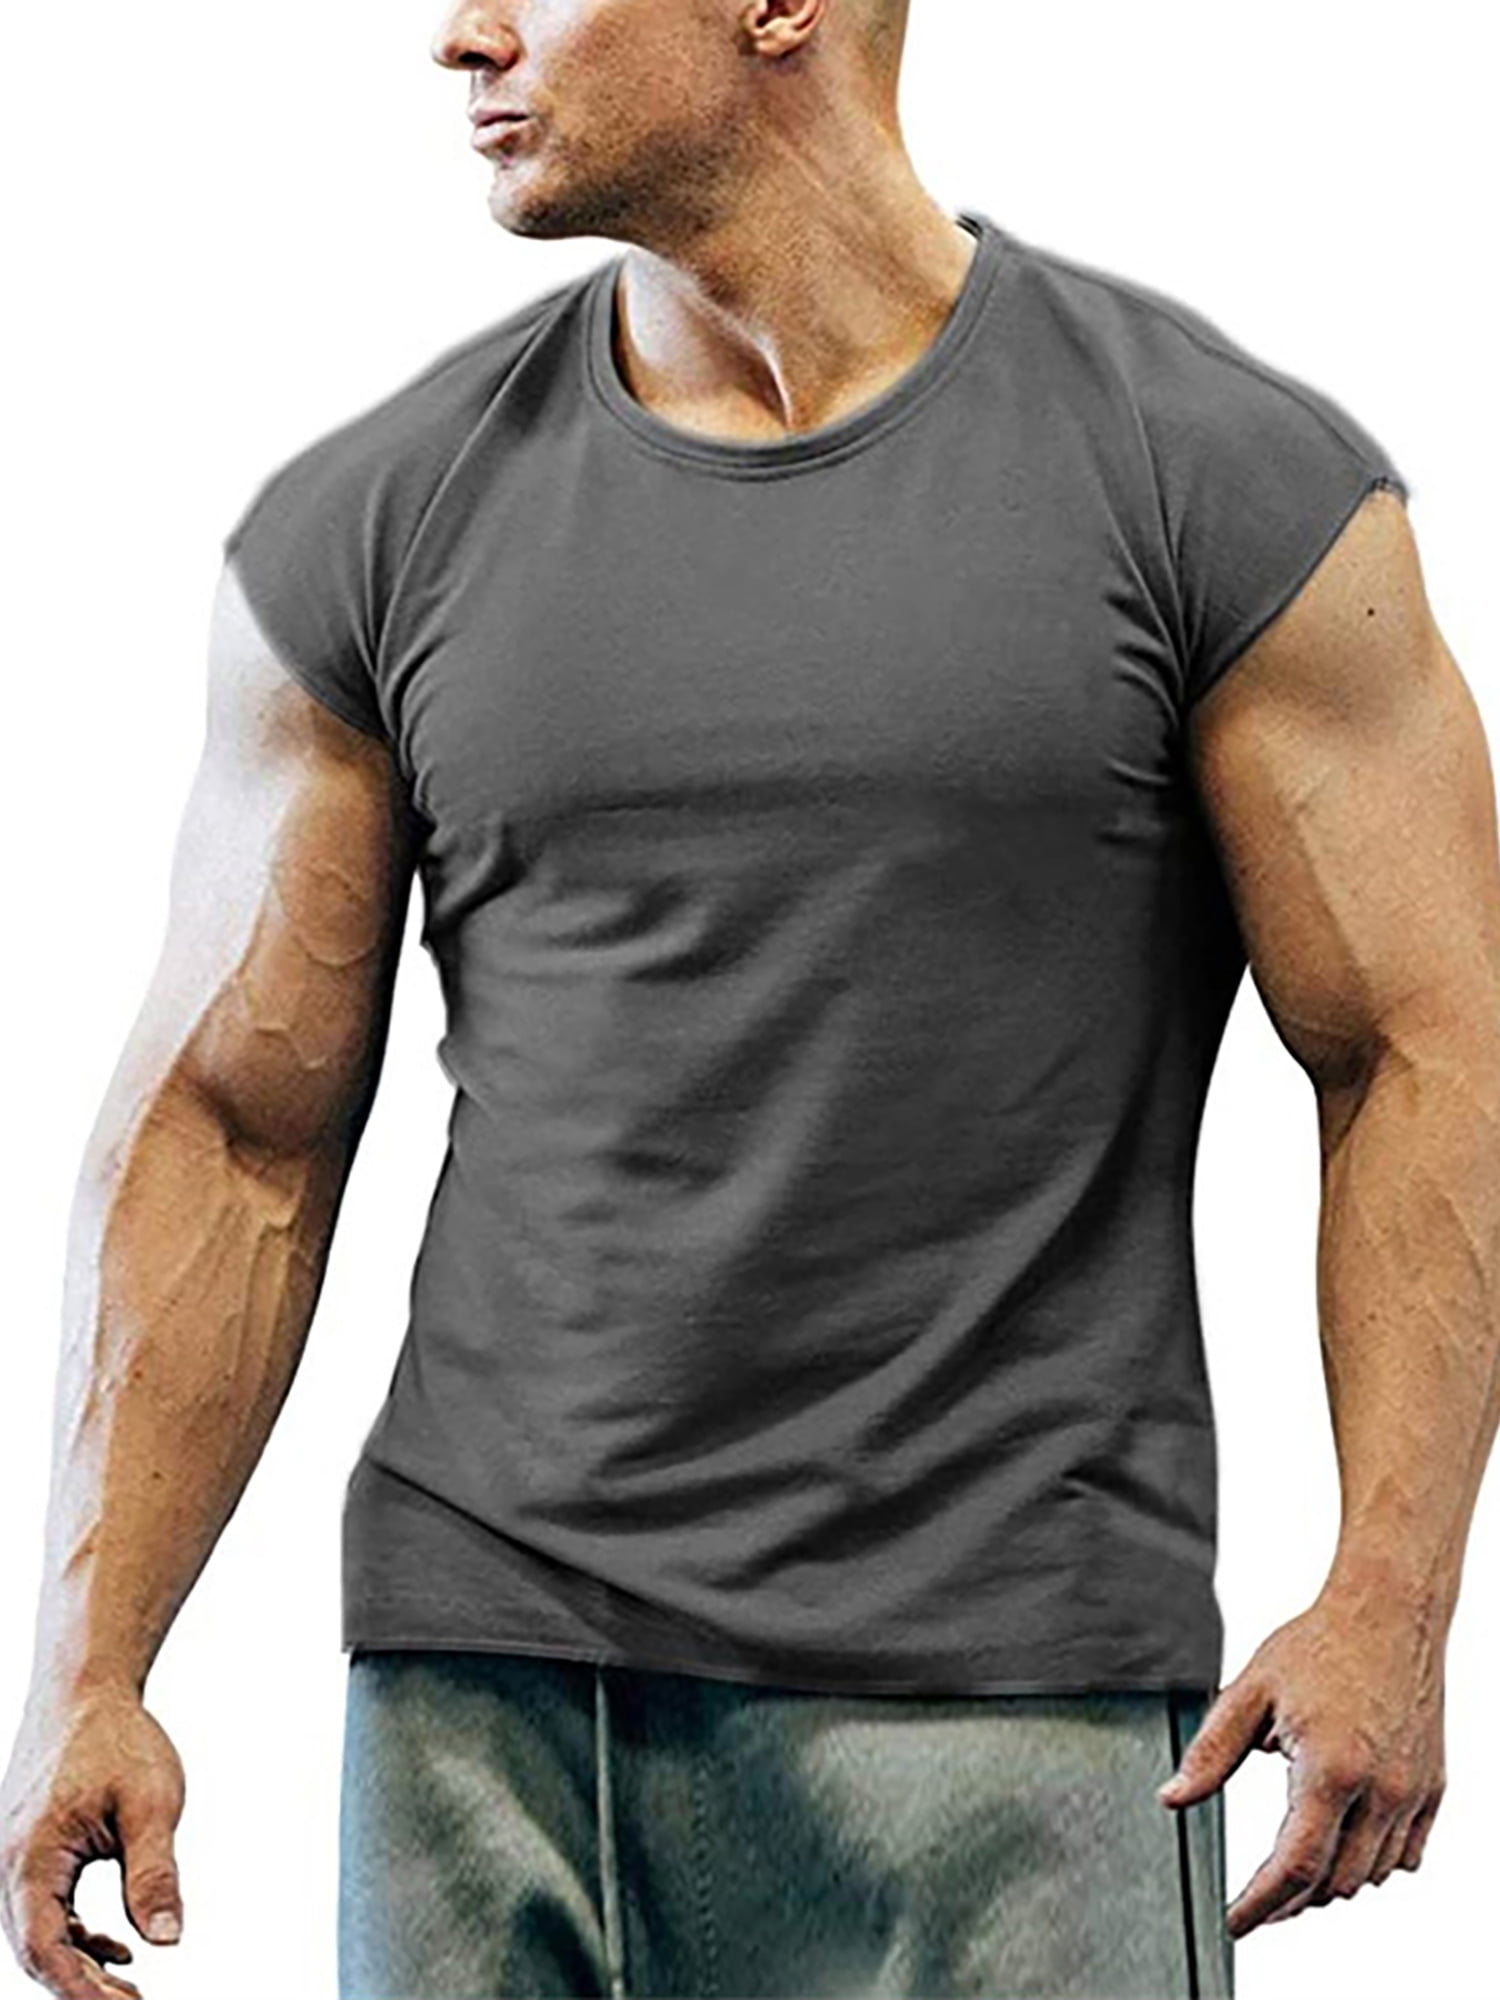 Mens Compression Shirt Short Sleeve Top Base Layer Gym Exercise Clothes Sports 